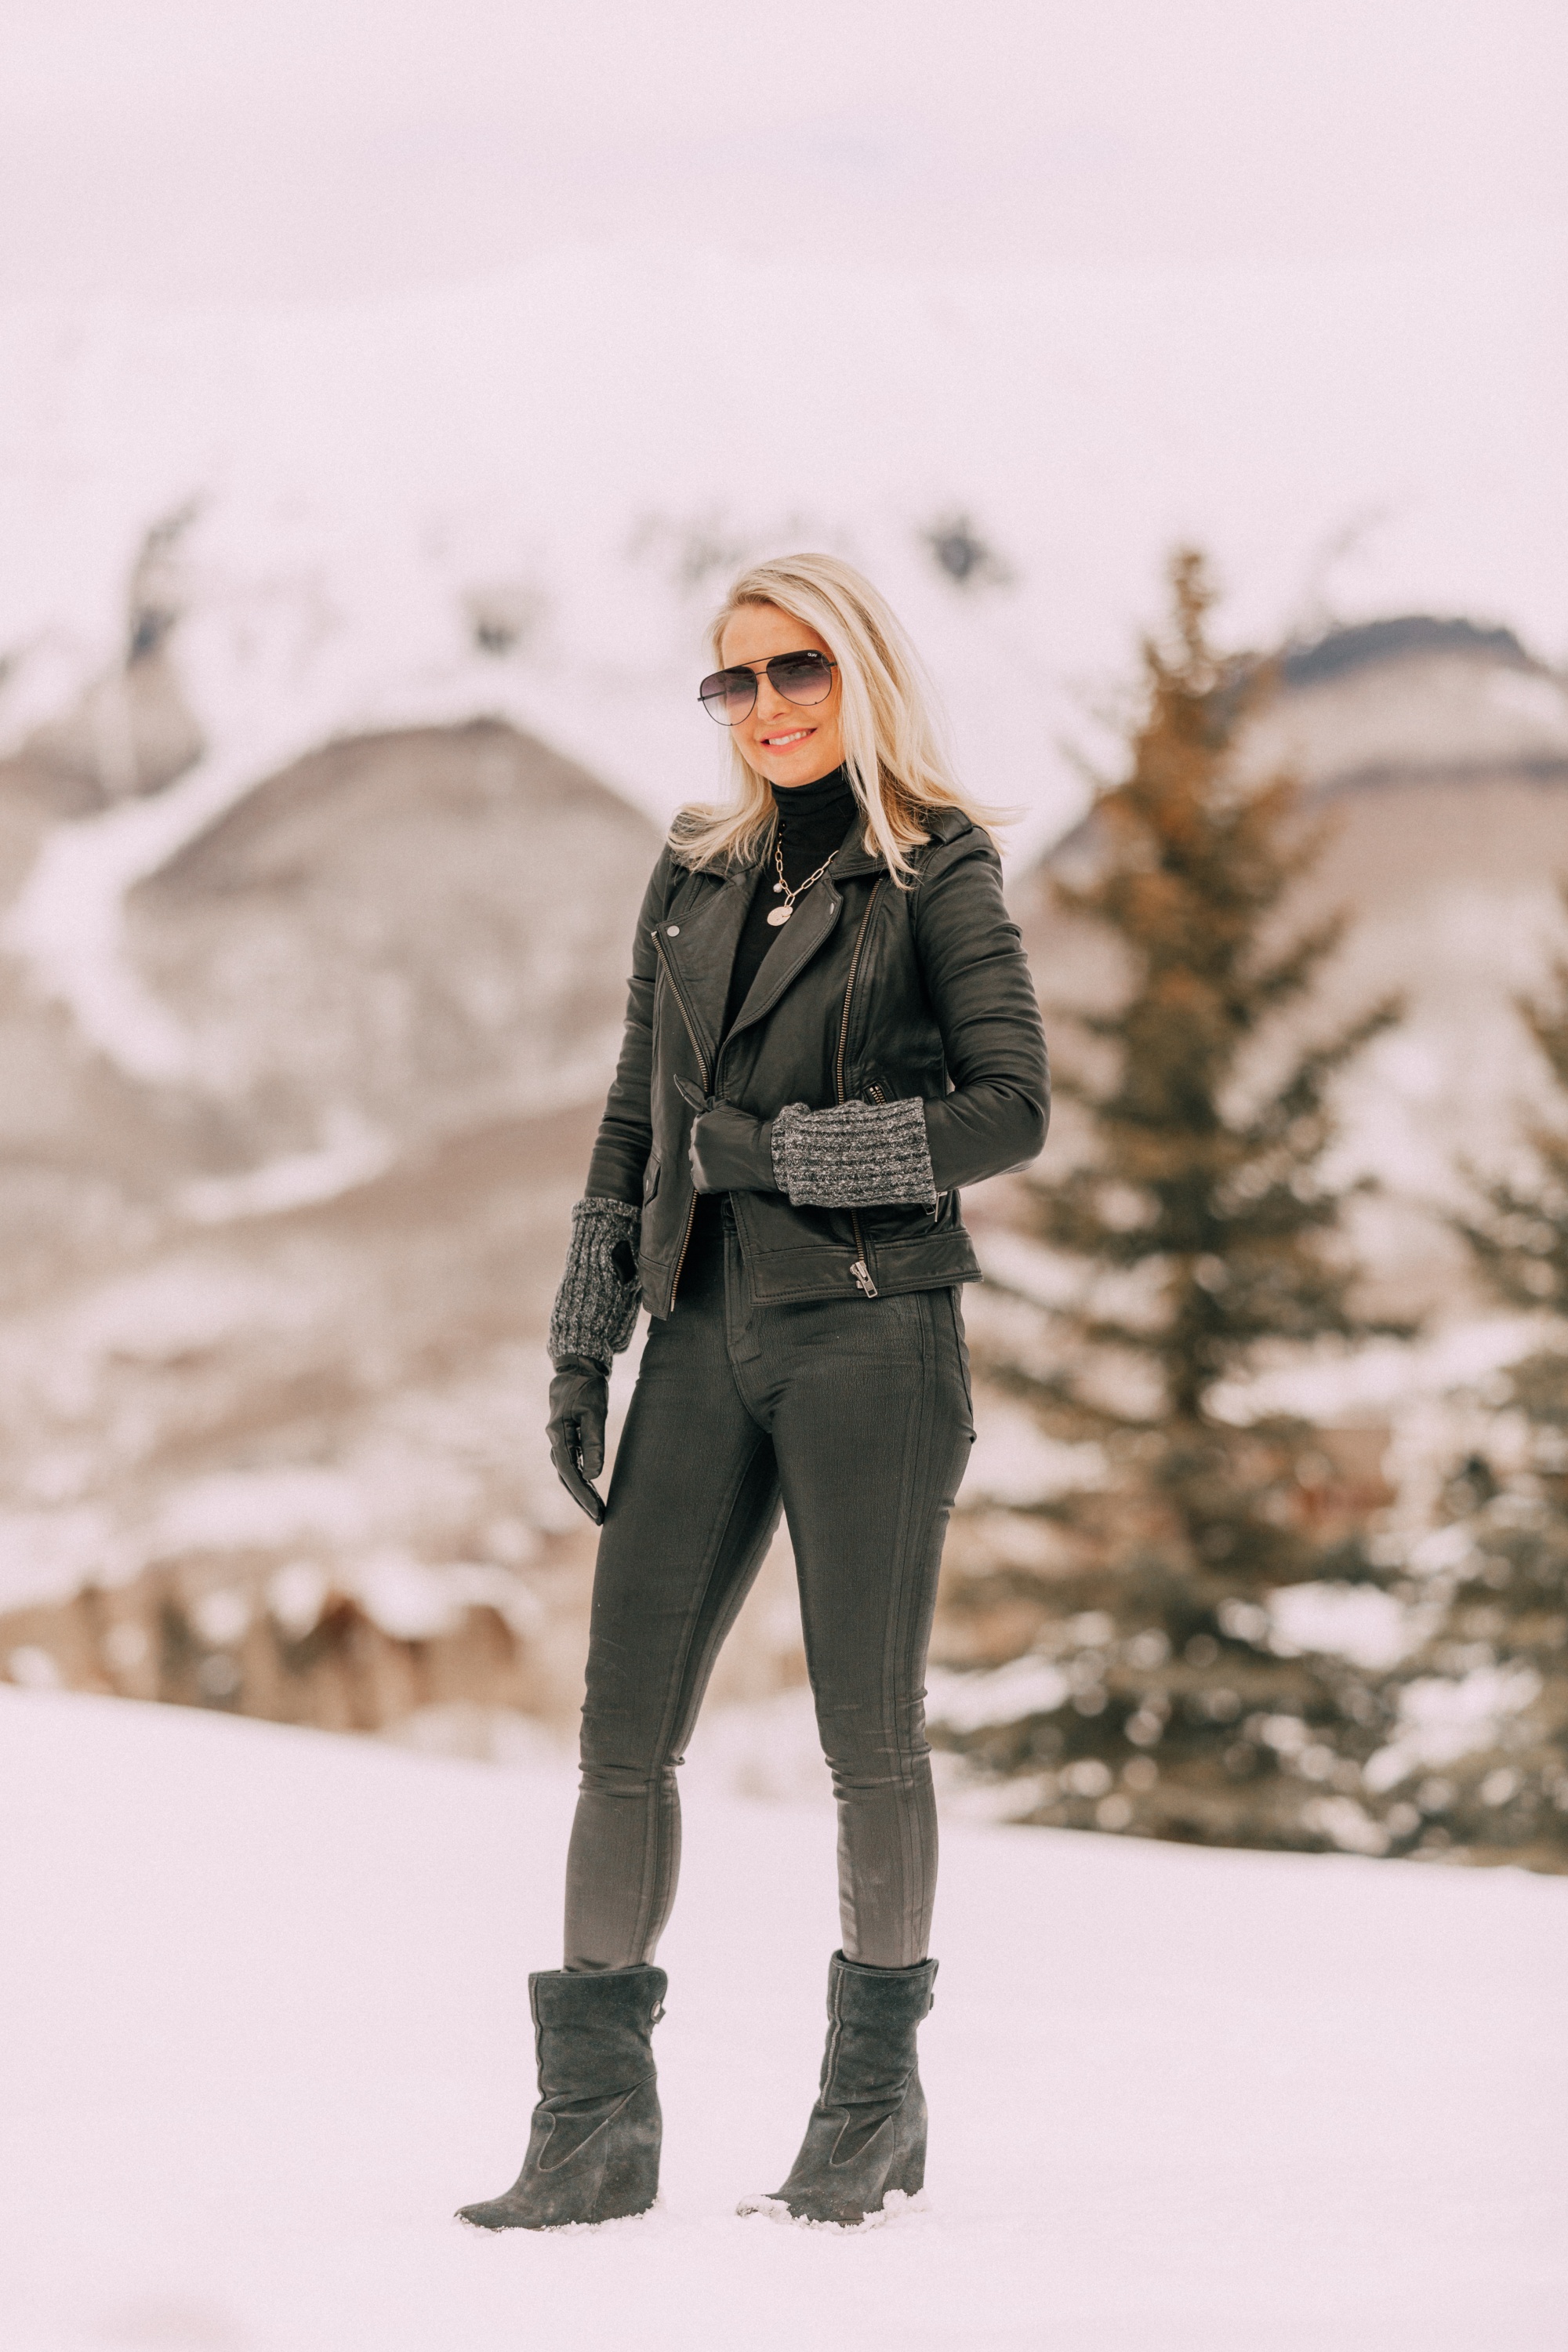 layered Moto Jacket outfit on Fashion blogger wearing a black leather IRO moto jacket, Carolina Amato gloves, rocket leatherette skinny jeans by Citizens of Humanity, black cashmere turtleneck, and Ugg wedge boots in Telluride, CO